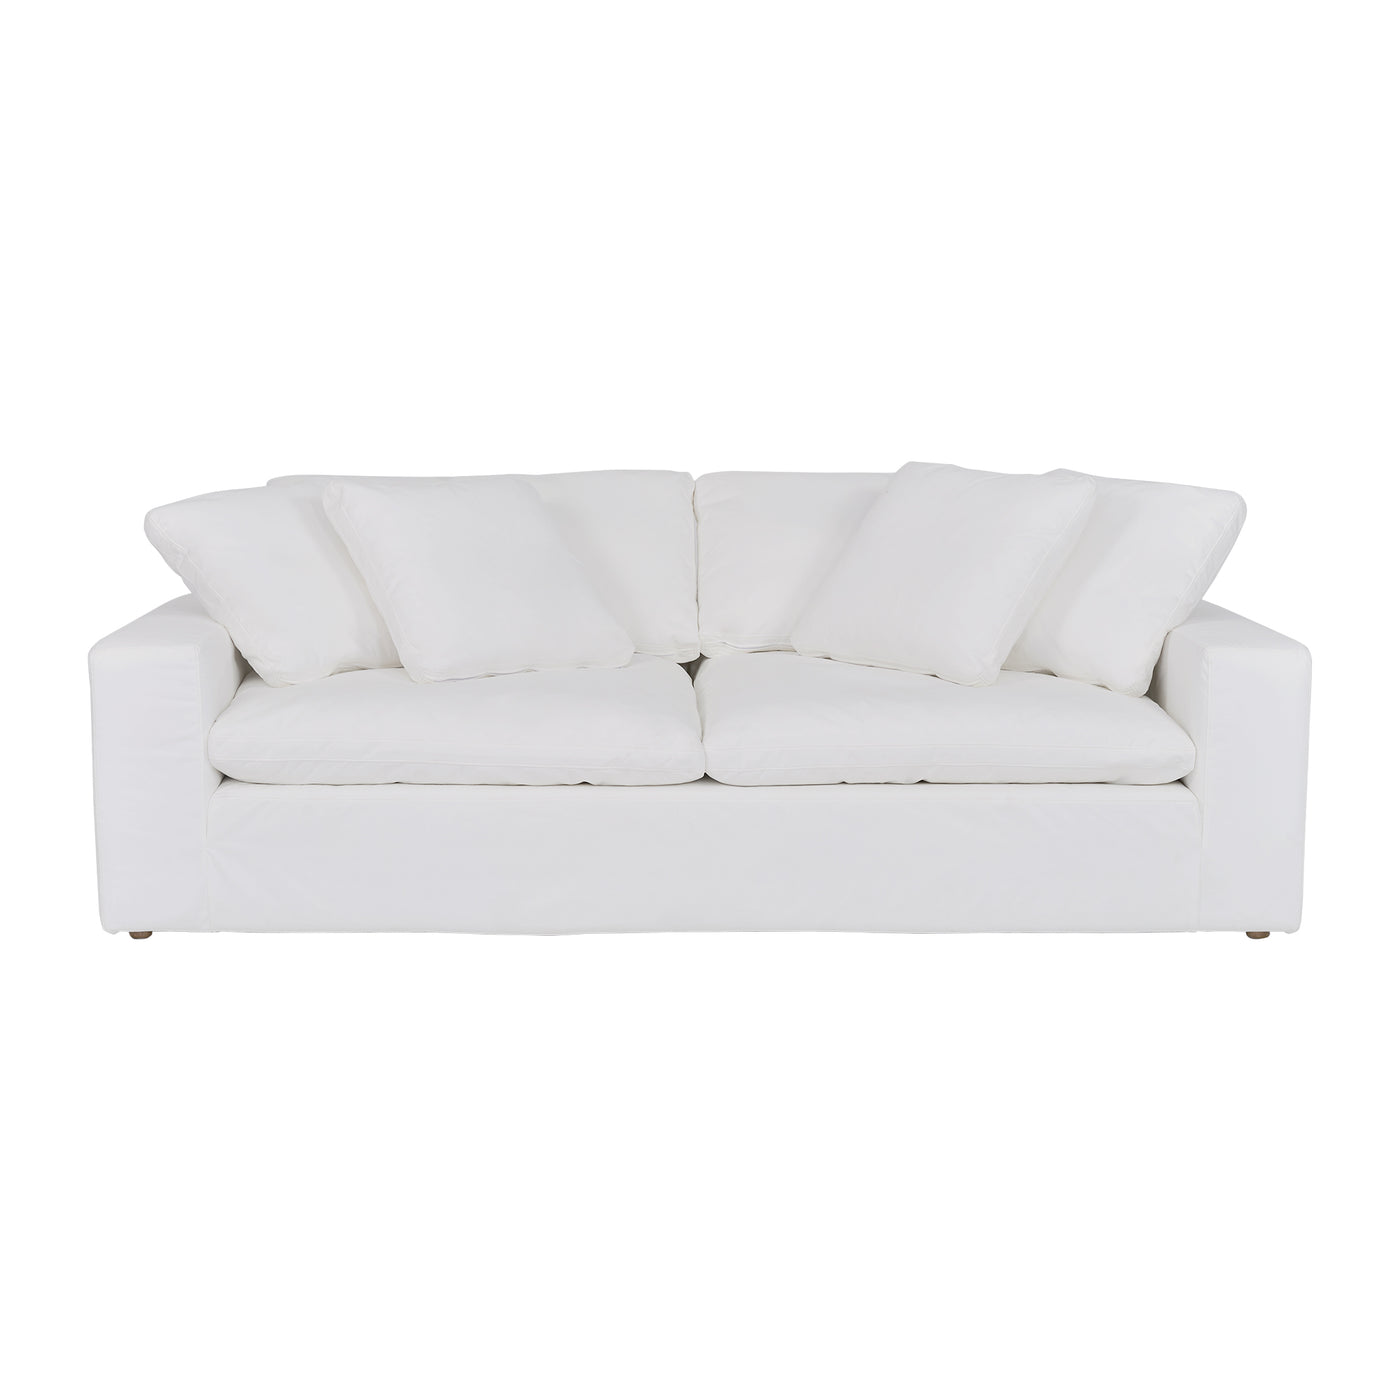 Liberty 96.5 in. Upholstered Sofa